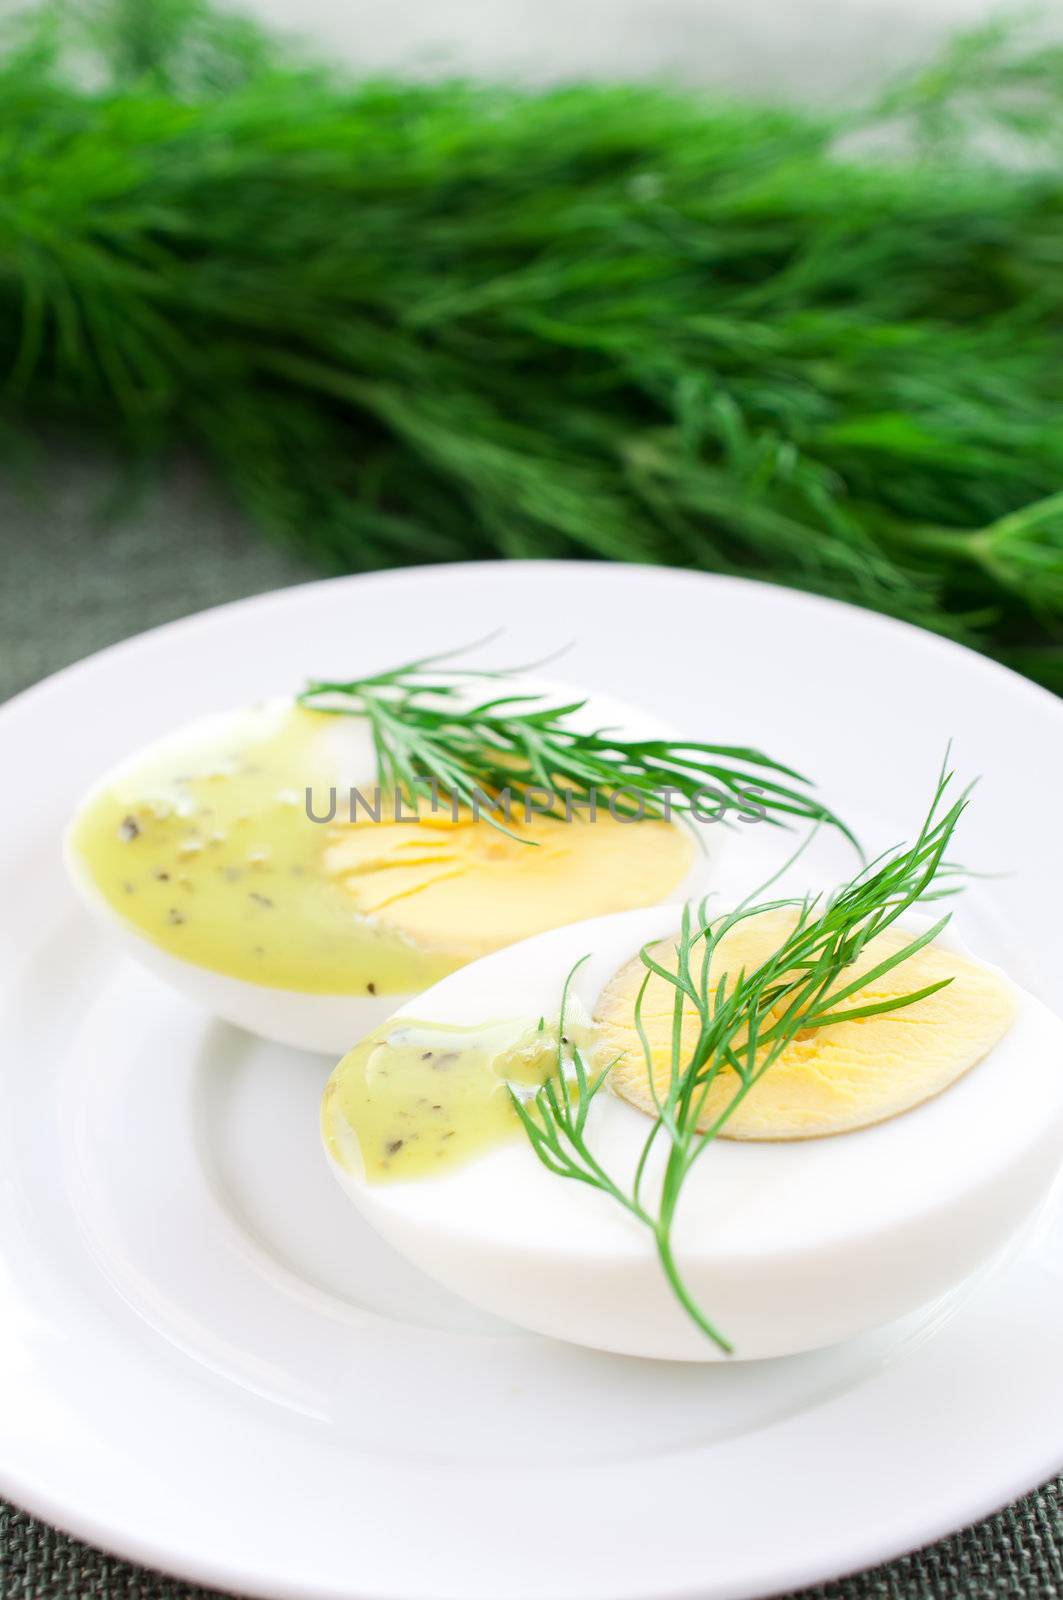 Boiled egg cut in half on dill background